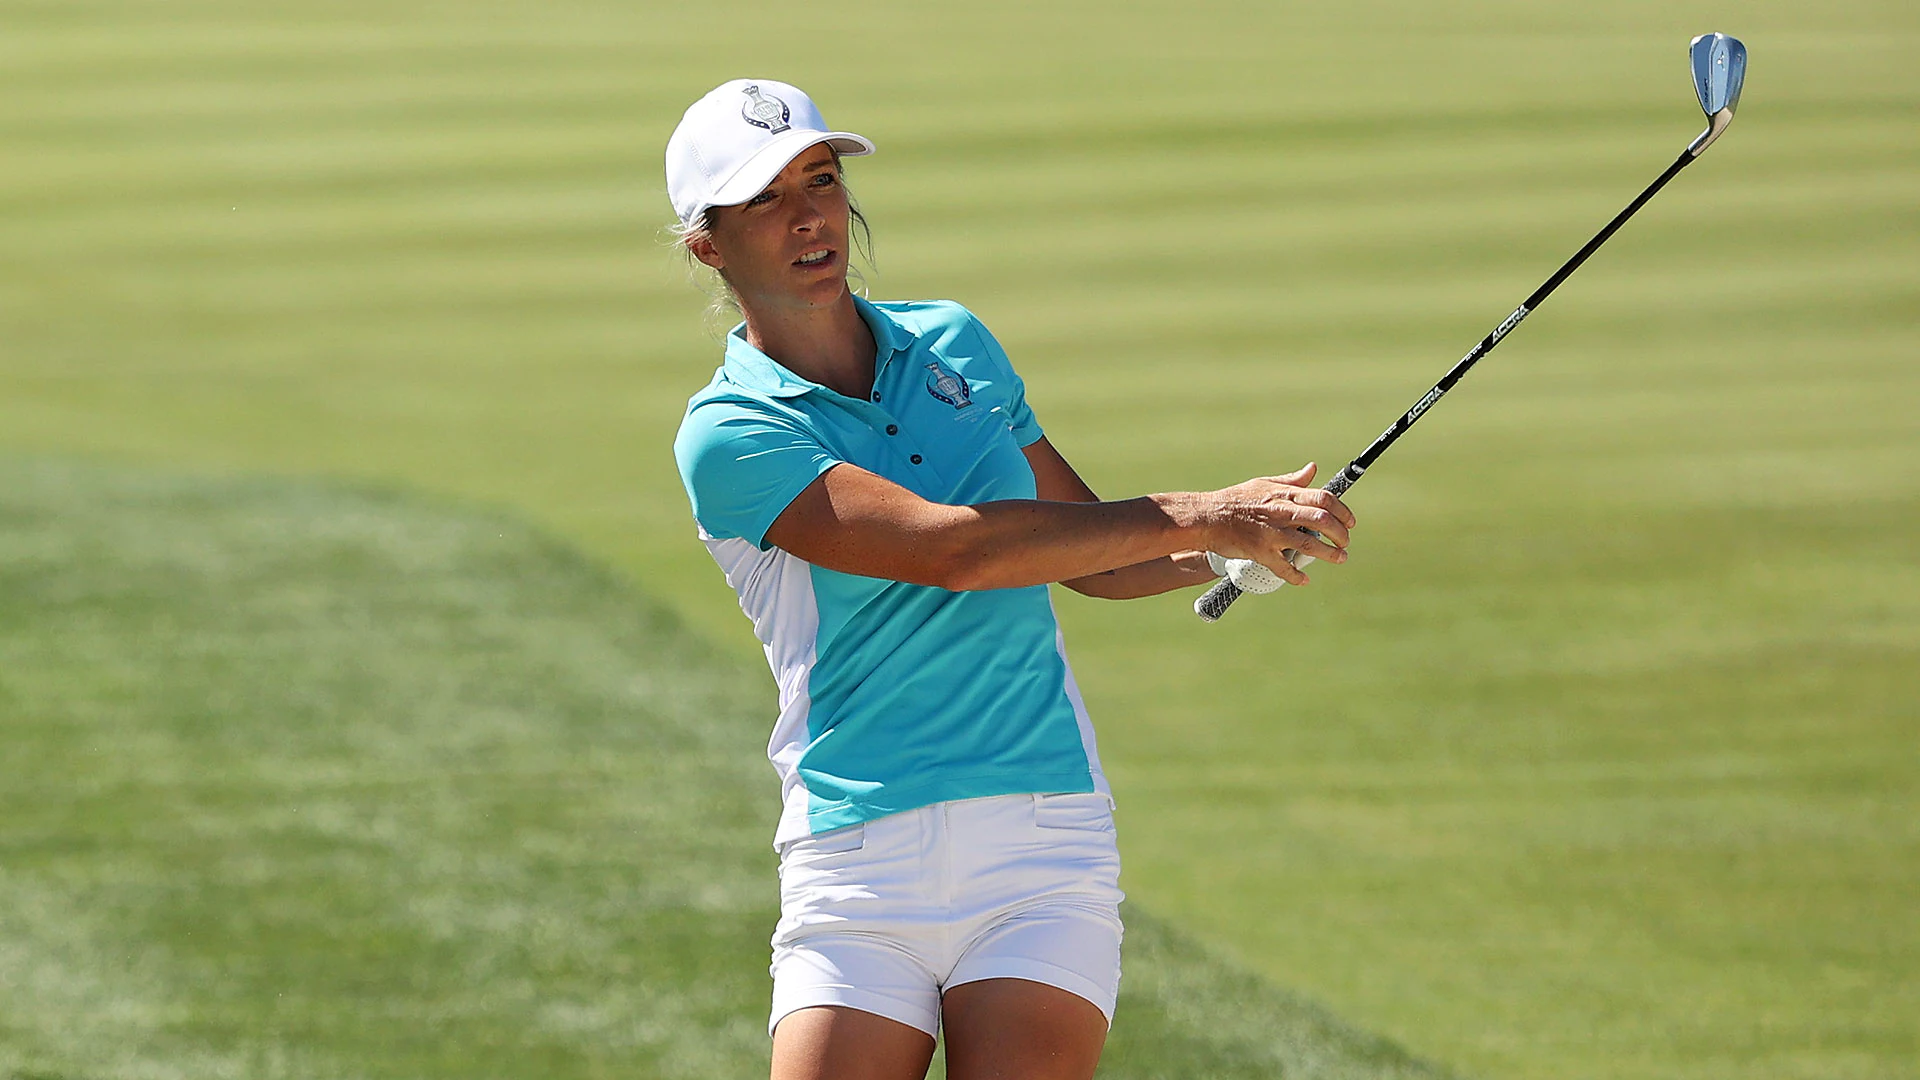 After assistant captain stint, Mel Reid a leader on and off the course at Solheim Cup